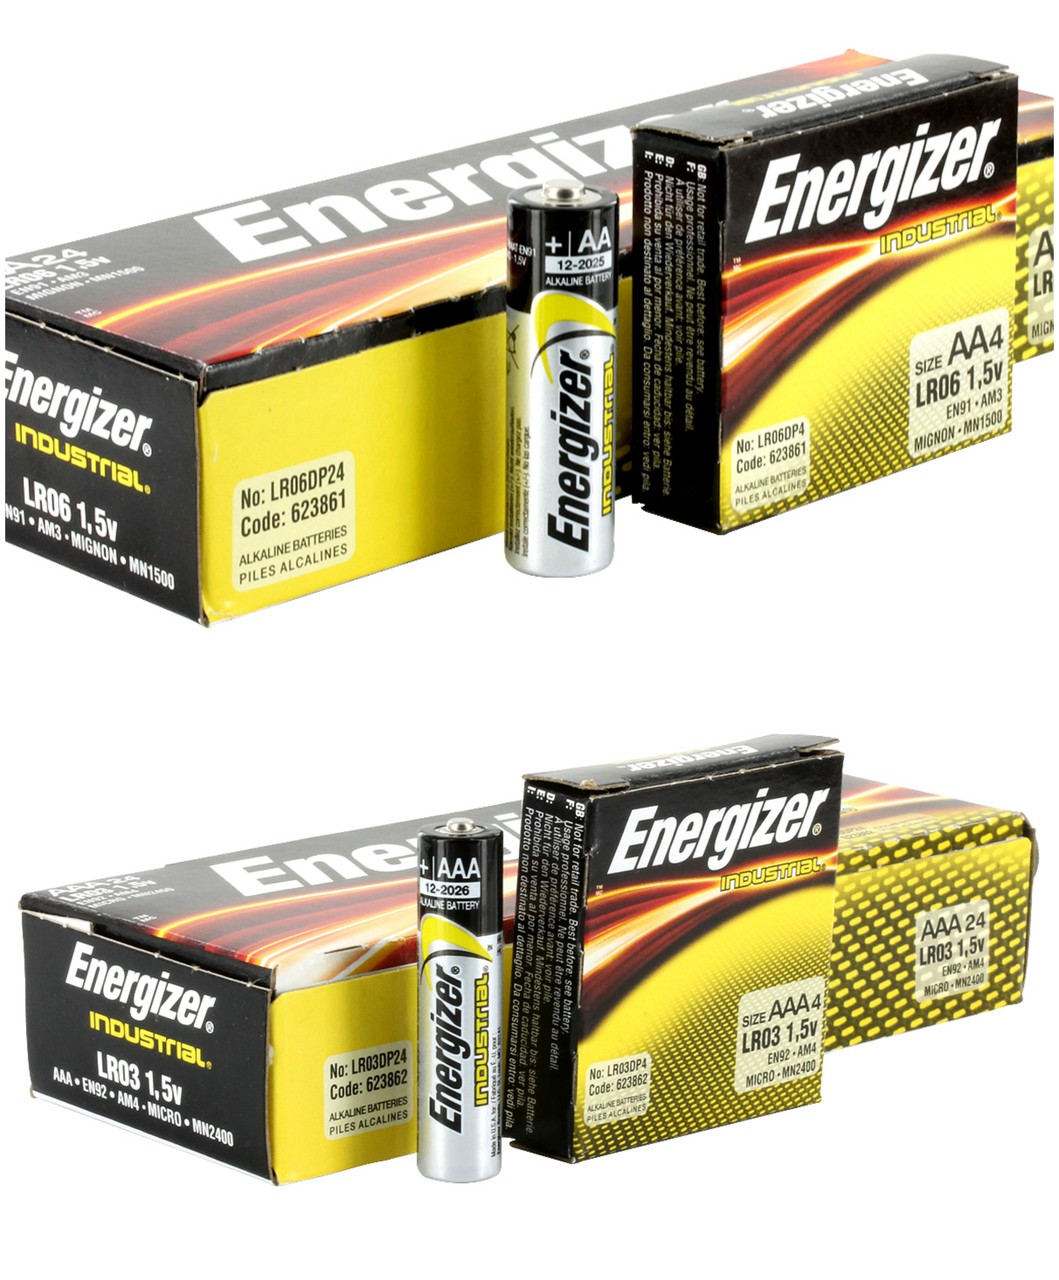 48 Piece Combo Pack - Energizer Industrial Alkaline 24 AAA + 24 AA - FREE SHIPPING!